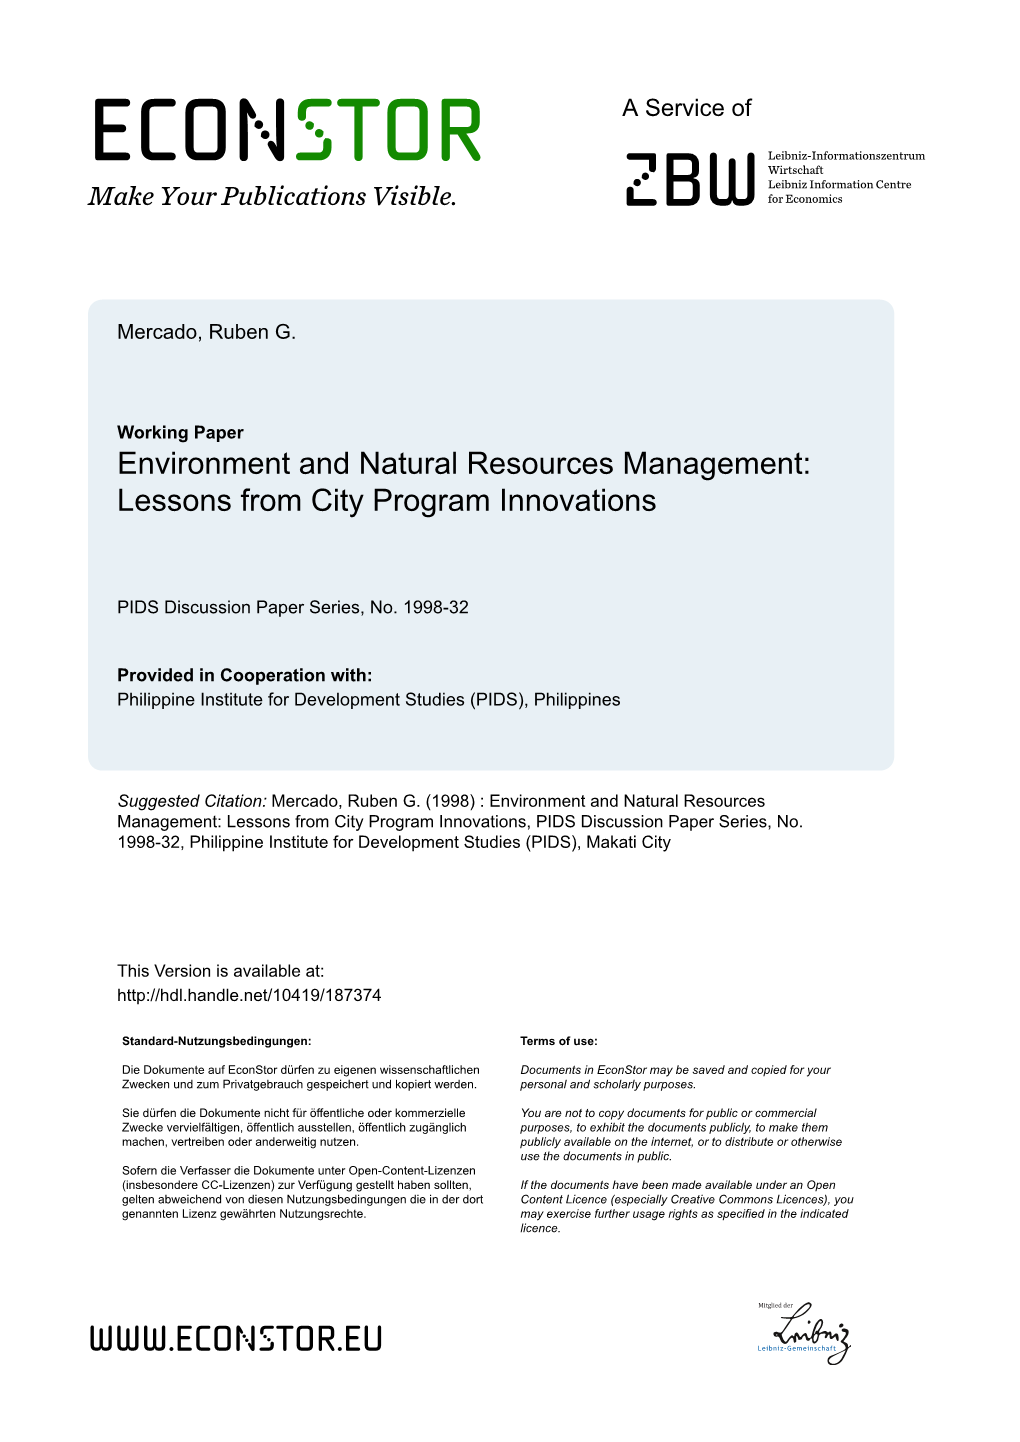 Environment and Natural Resources Management: Lessons from City Program Innovations